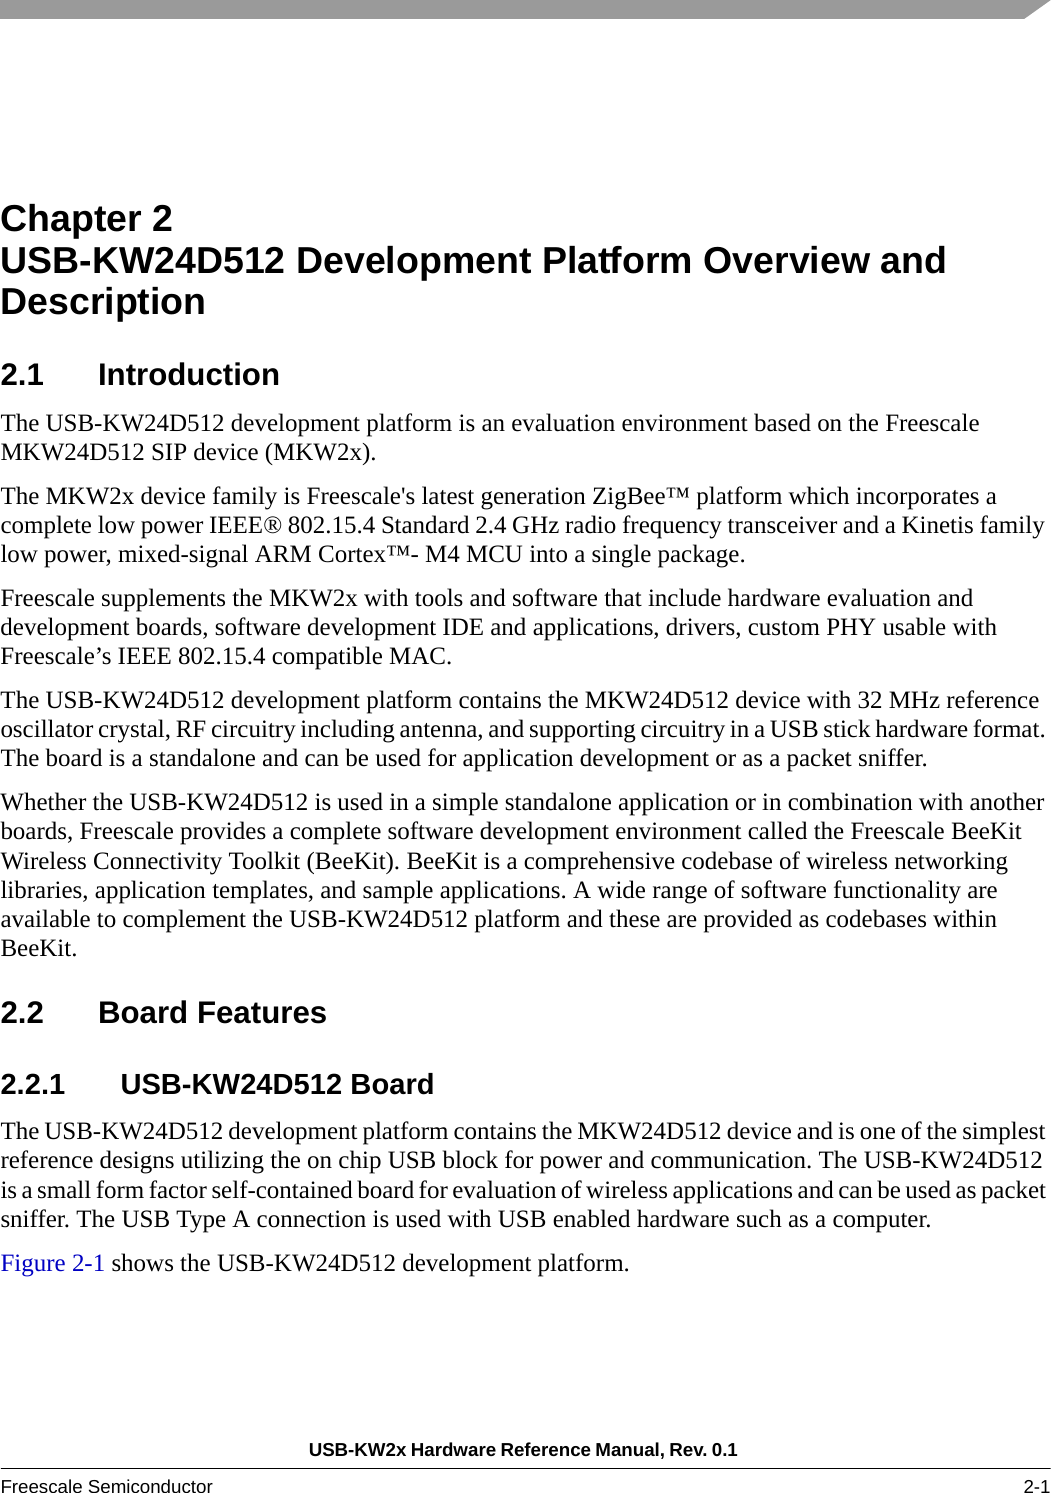 USB-KW2x Hardware Reference Manual, Rev. 0.1 Freescale Semiconductor 2-1Chapter 2  USB-KW24D512 Development Platform Overview and Description2.1 IntroductionThe USB-KW24D512 development platform is an evaluation environment based on the Freescale MKW24D512 SIP device (MKW2x).The MKW2x device family is Freescale&apos;s latest generation ZigBee™ platform which incorporates a complete low power IEEE® 802.15.4 Standard 2.4 GHz radio frequency transceiver and a Kinetis family low power, mixed-signal ARM Cortex™- M4 MCU into a single package.Freescale supplements the MKW2x with tools and software that include hardware evaluation and development boards, software development IDE and applications, drivers, custom PHY usable with Freescale’s IEEE 802.15.4 compatible MAC.The USB-KW24D512 development platform contains the MKW24D512 device with 32 MHz reference oscillator crystal, RF circuitry including antenna, and supporting circuitry in a USB stick hardware format. The board is a standalone and can be used for application development or as a packet sniffer.Whether the USB-KW24D512 is used in a simple standalone application or in combination with another boards, Freescale provides a complete software development environment called the Freescale BeeKit Wireless Connectivity Toolkit (BeeKit). BeeKit is a comprehensive codebase of wireless networking libraries, application templates, and sample applications. A wide range of software functionality are available to complement the USB-KW24D512 platform and these are provided as codebases within BeeKit.2.2 Board Features2.2.1 USB-KW24D512 BoardThe USB-KW24D512 development platform contains the MKW24D512 device and is one of the simplest reference designs utilizing the on chip USB block for power and communication. The USB-KW24D512 is a small form factor self-contained board for evaluation of wireless applications and can be used as packet sniffer. The USB Type A connection is used with USB enabled hardware such as a computer.Figure 2-1 shows the USB-KW24D512 development platform.